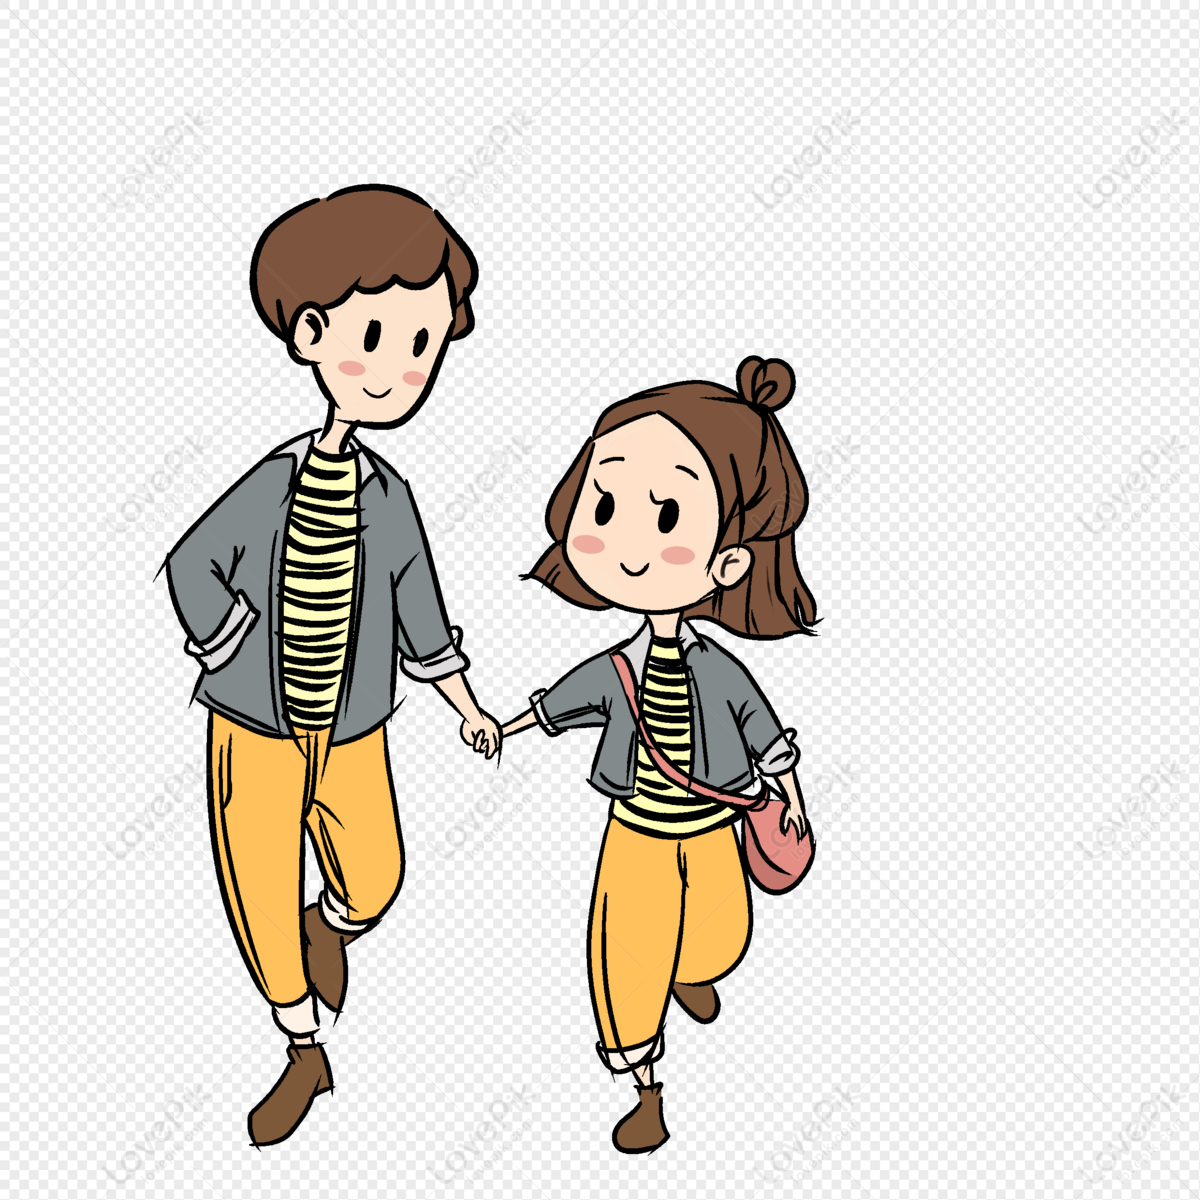 Hand Drawn Happy Cartoon Couple Holding Hands Free PNG And Clipart Image  For Free Download - Lovepik | 401176709